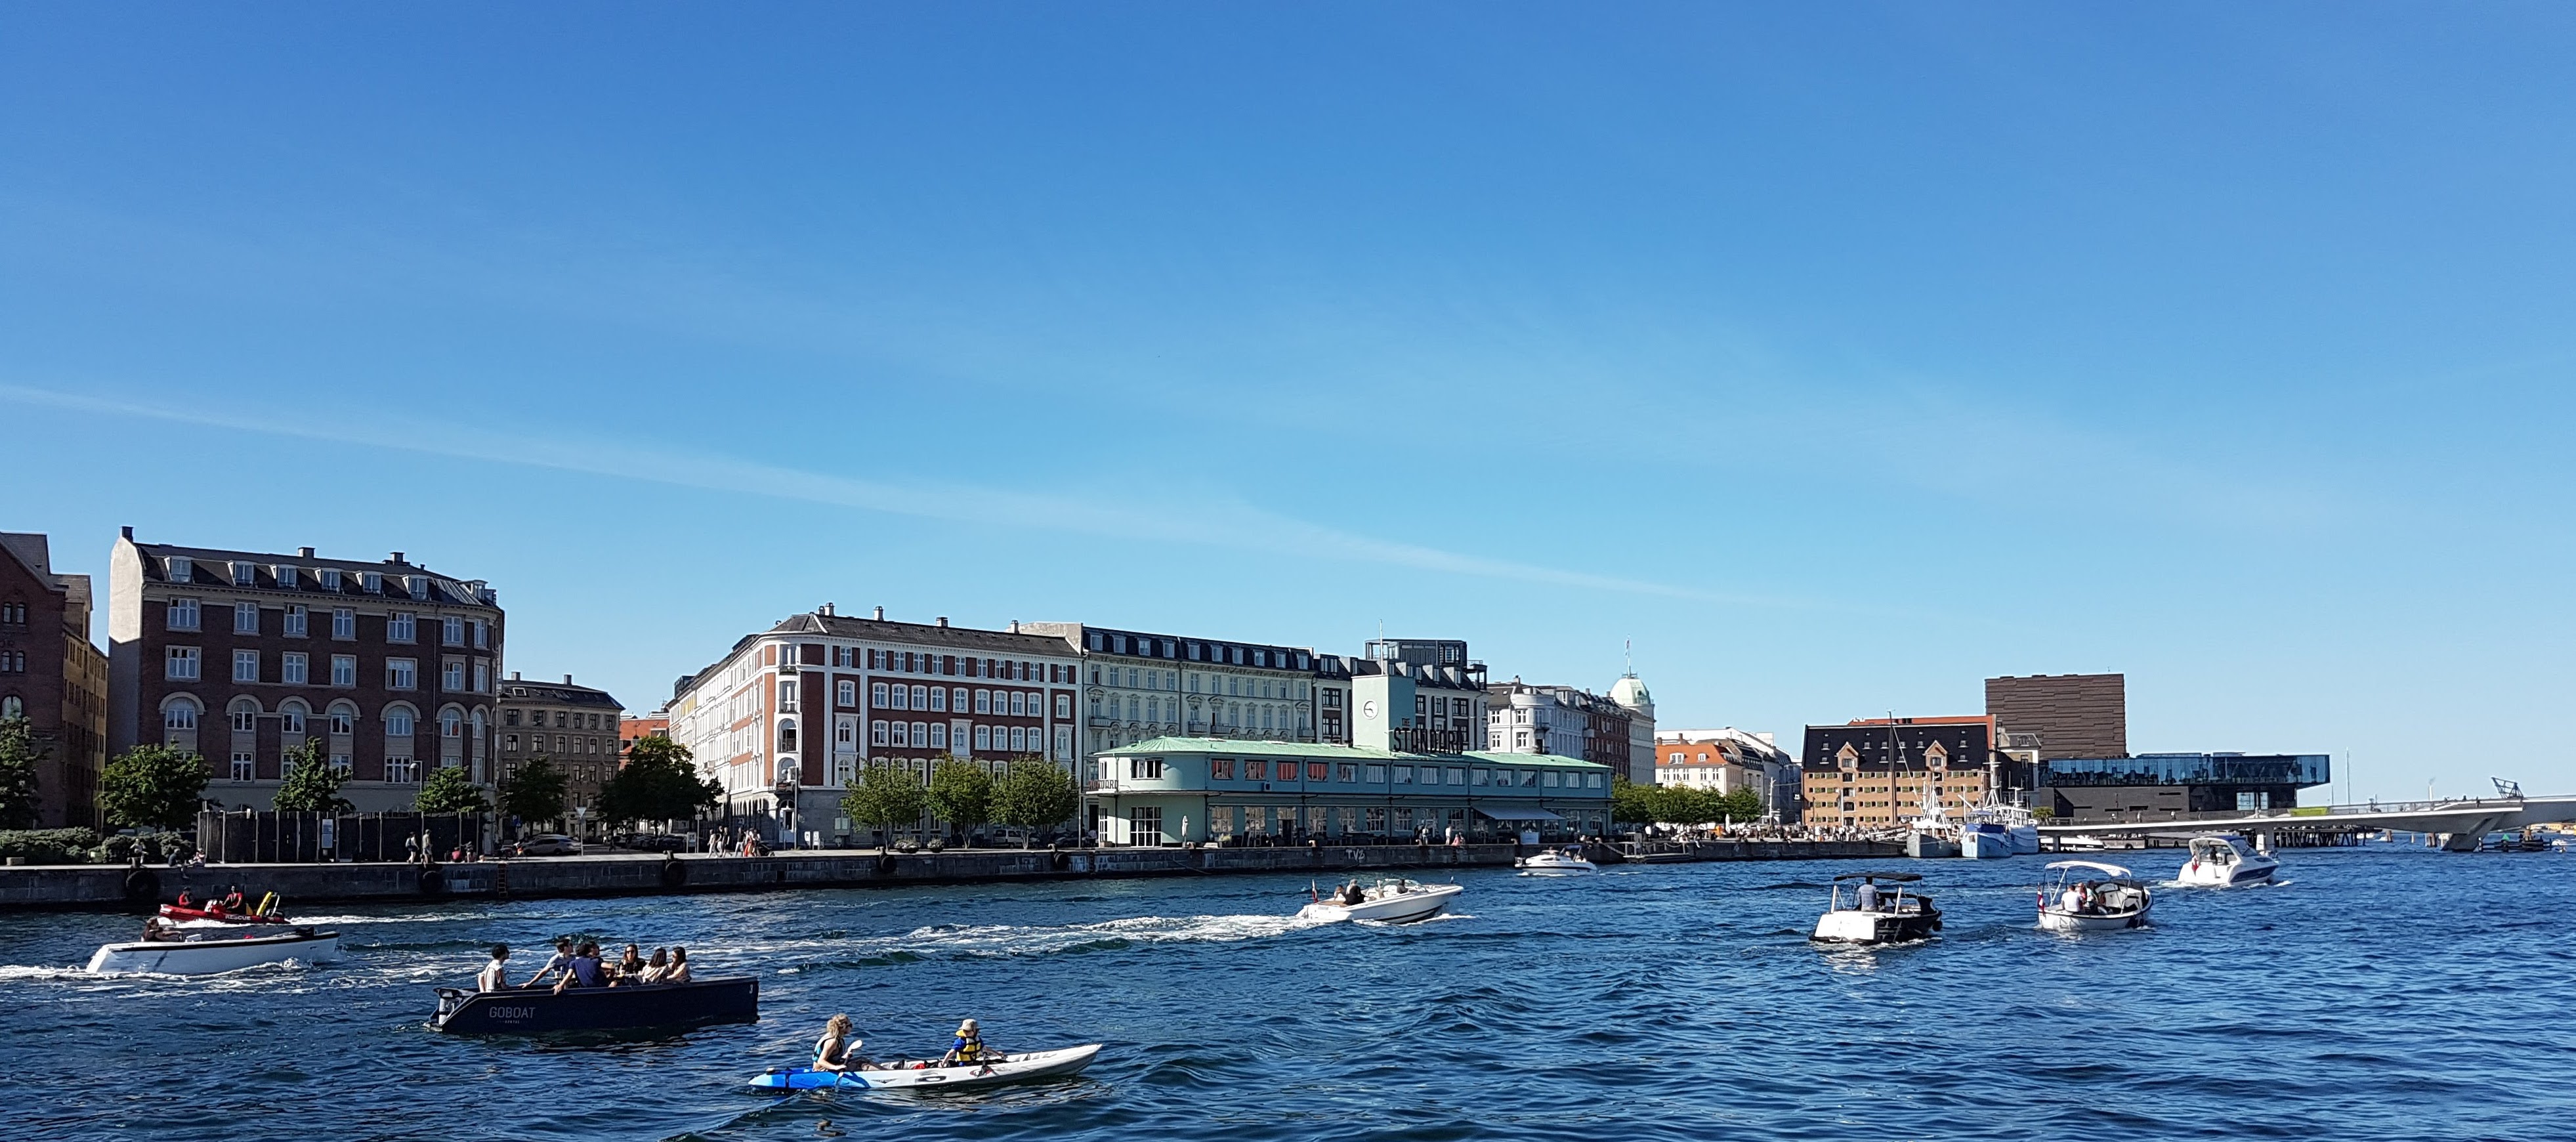 Copenhagen canals cruise with picnic boats